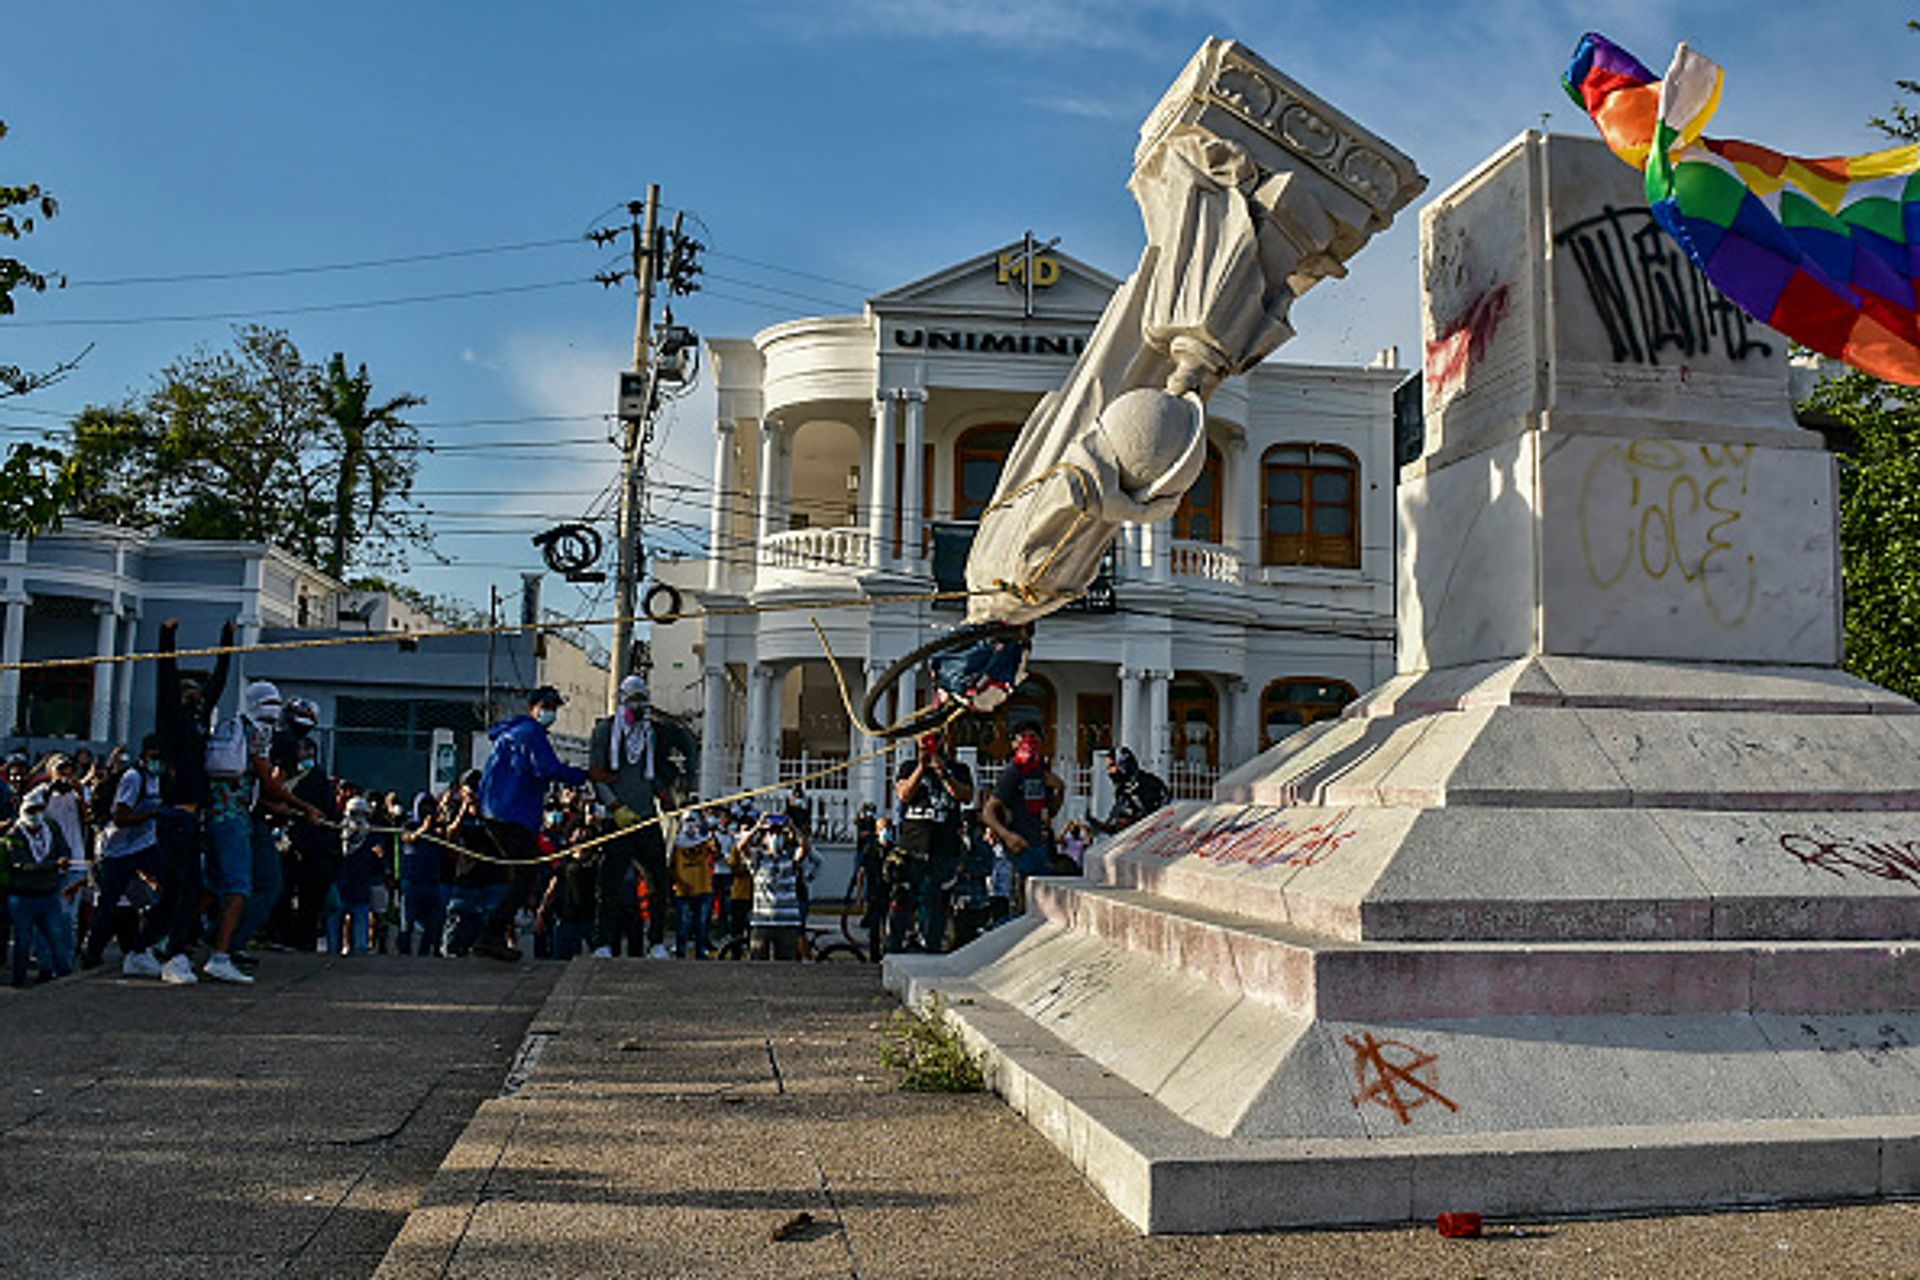 Protestors topple a statue of Christopher Columbus during a demonstration against the government in Barranquilla, Colombia on 28 June 2021 Photo: Mery Grandos Herrera/AFP via Getty Images